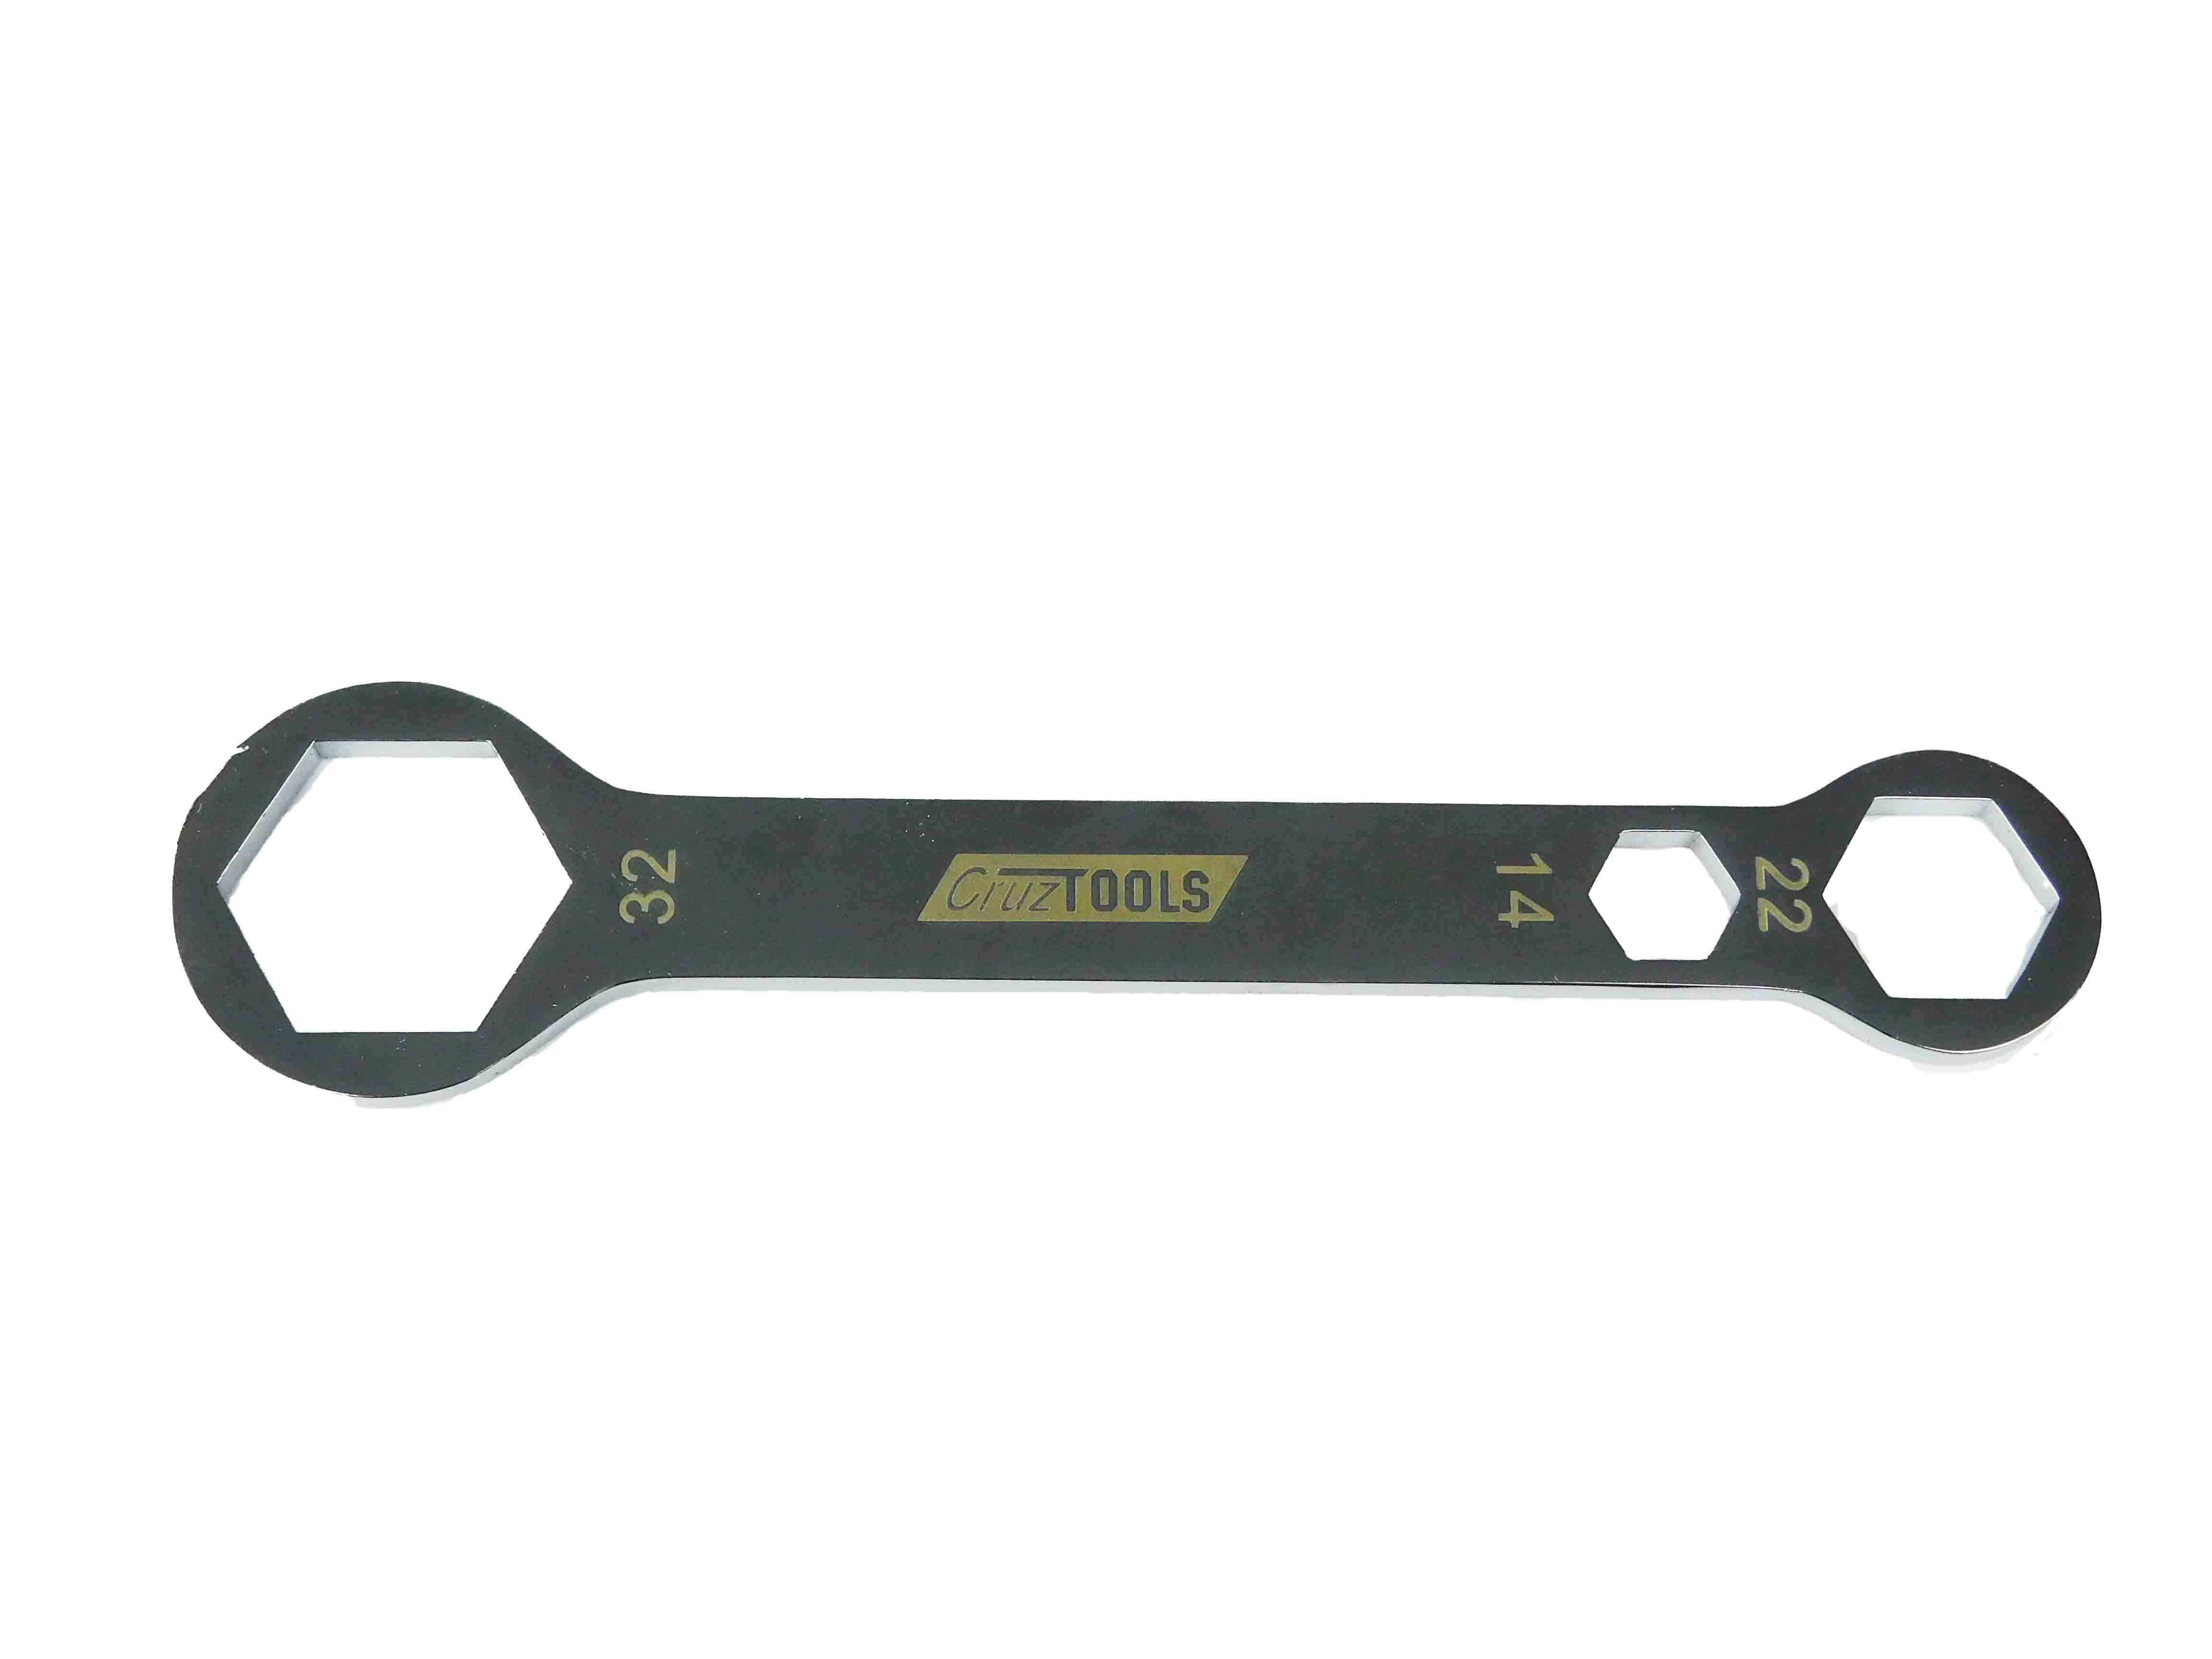 AW142232 CruzTOOLS Combo Axle Wrench 14mm x 22mm x 32mm